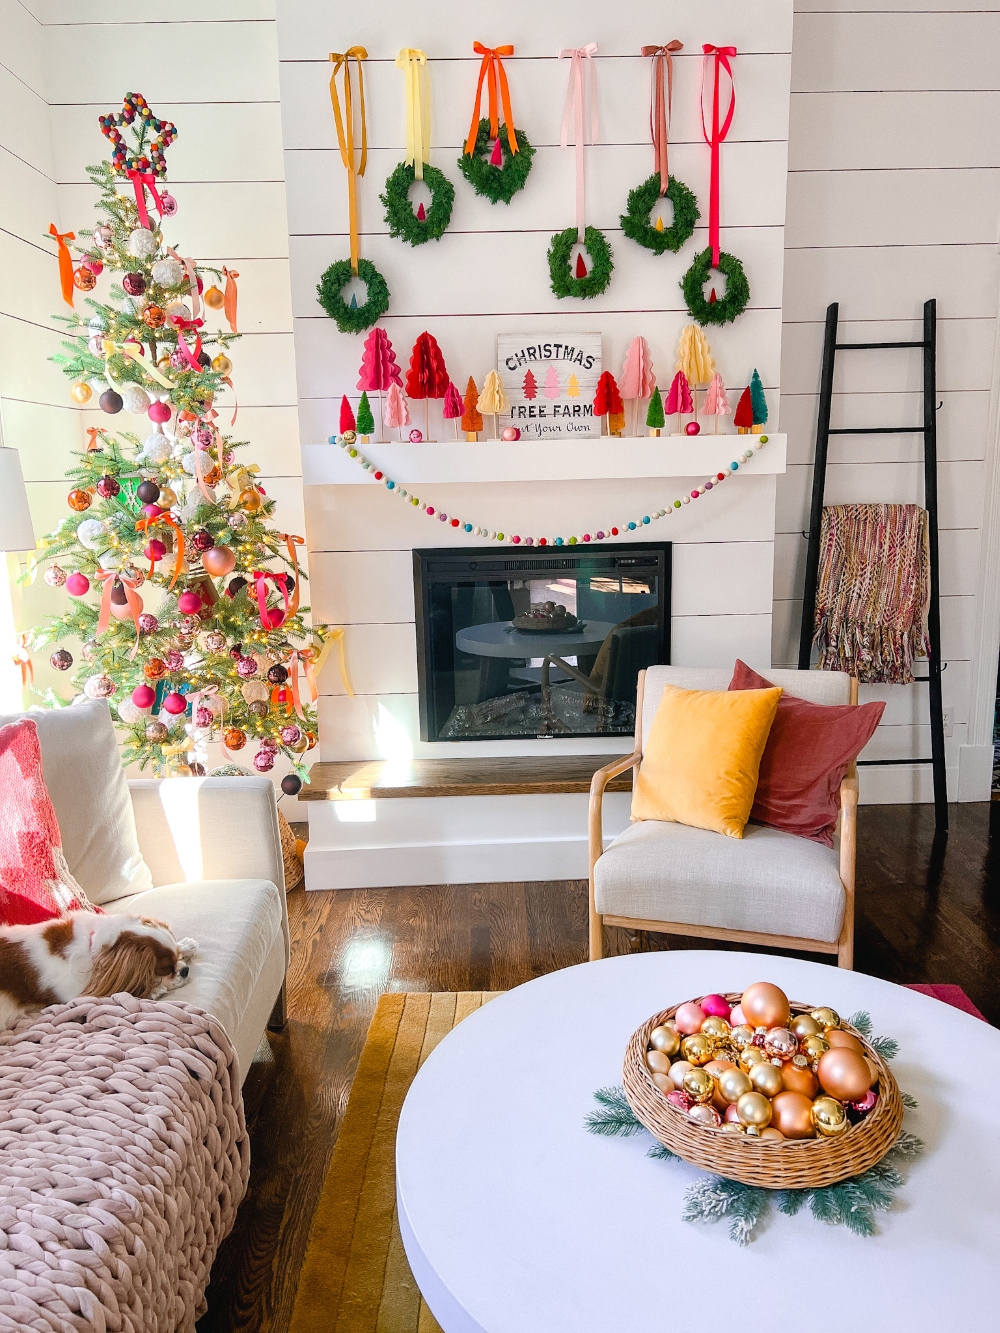 Eclectic Home Tour Tatertots and Jello - love her whimsical and colorful Christmas home 